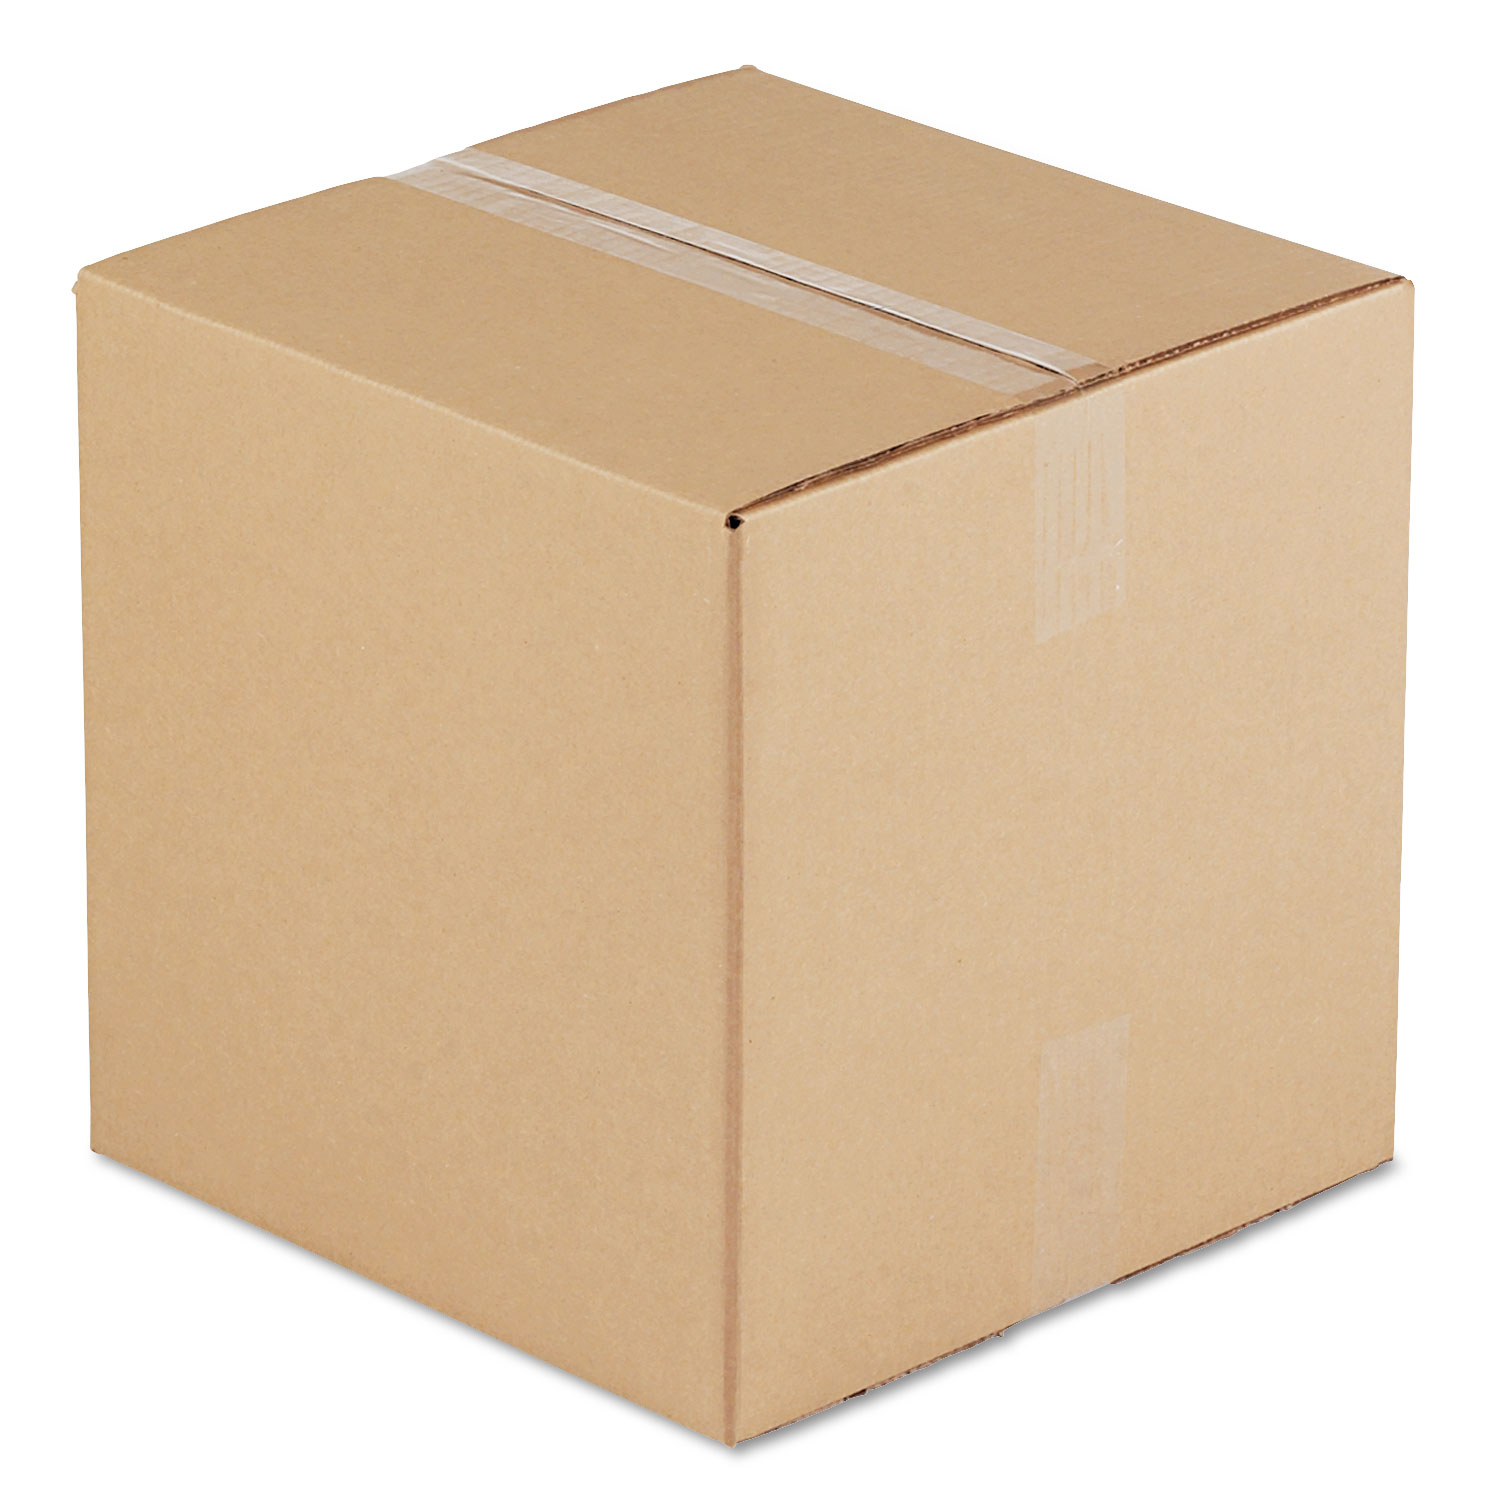 Cubed Fixed-Depth Shipping Boxes, Regular Slotted Container (RSC), 14